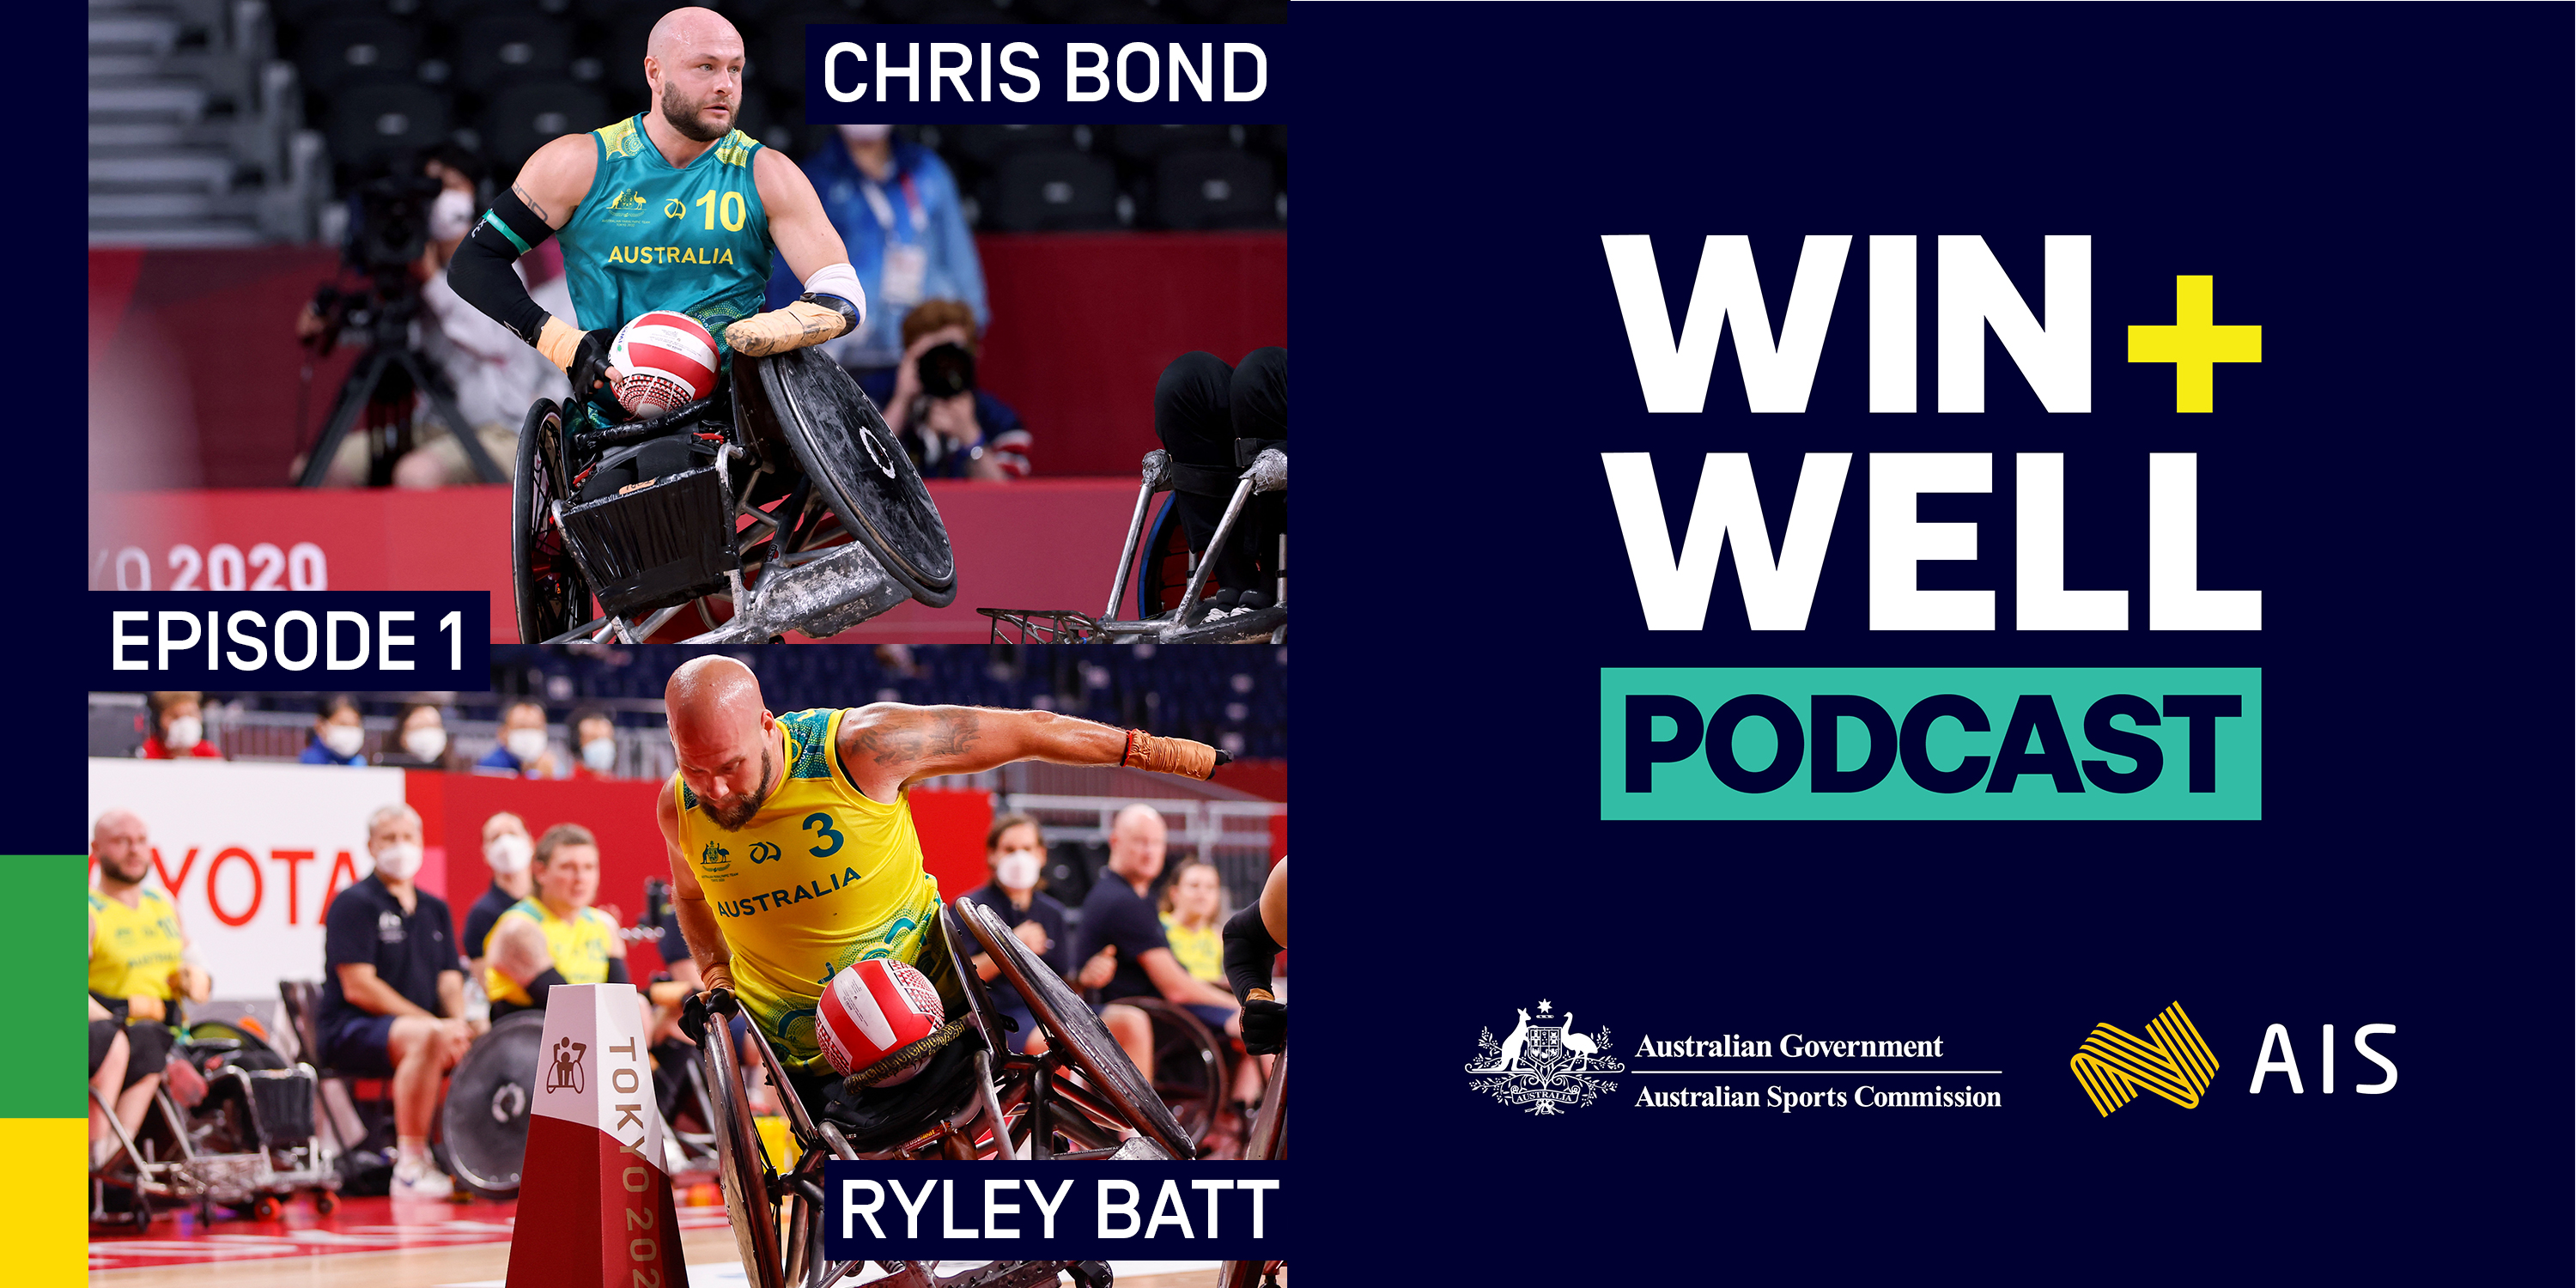 AIS Win Well Podcast Episode 1 features Wheelchair Rugby's Chris Bond and Ryley Batt.